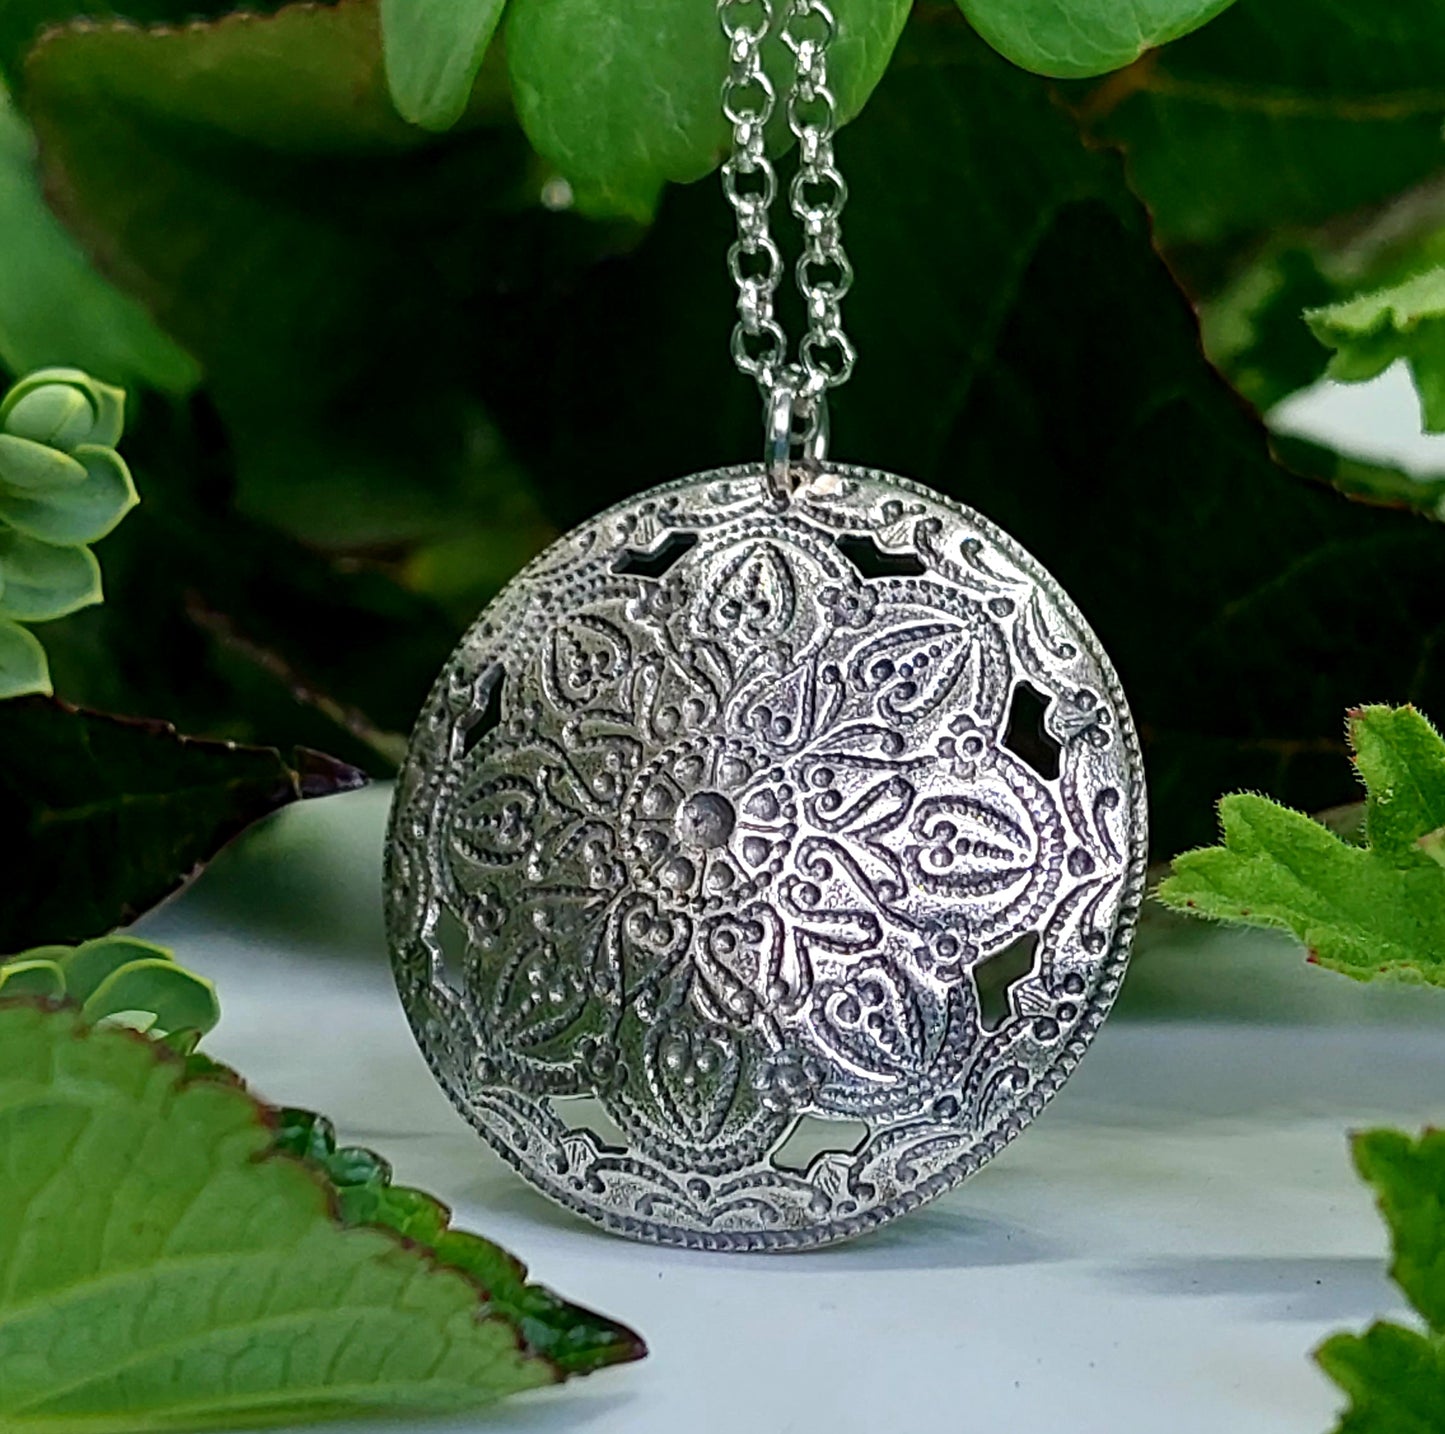 SALE! Re-minted Two Way Domed Garden Circle Pendant with Sixpence - 40% off!